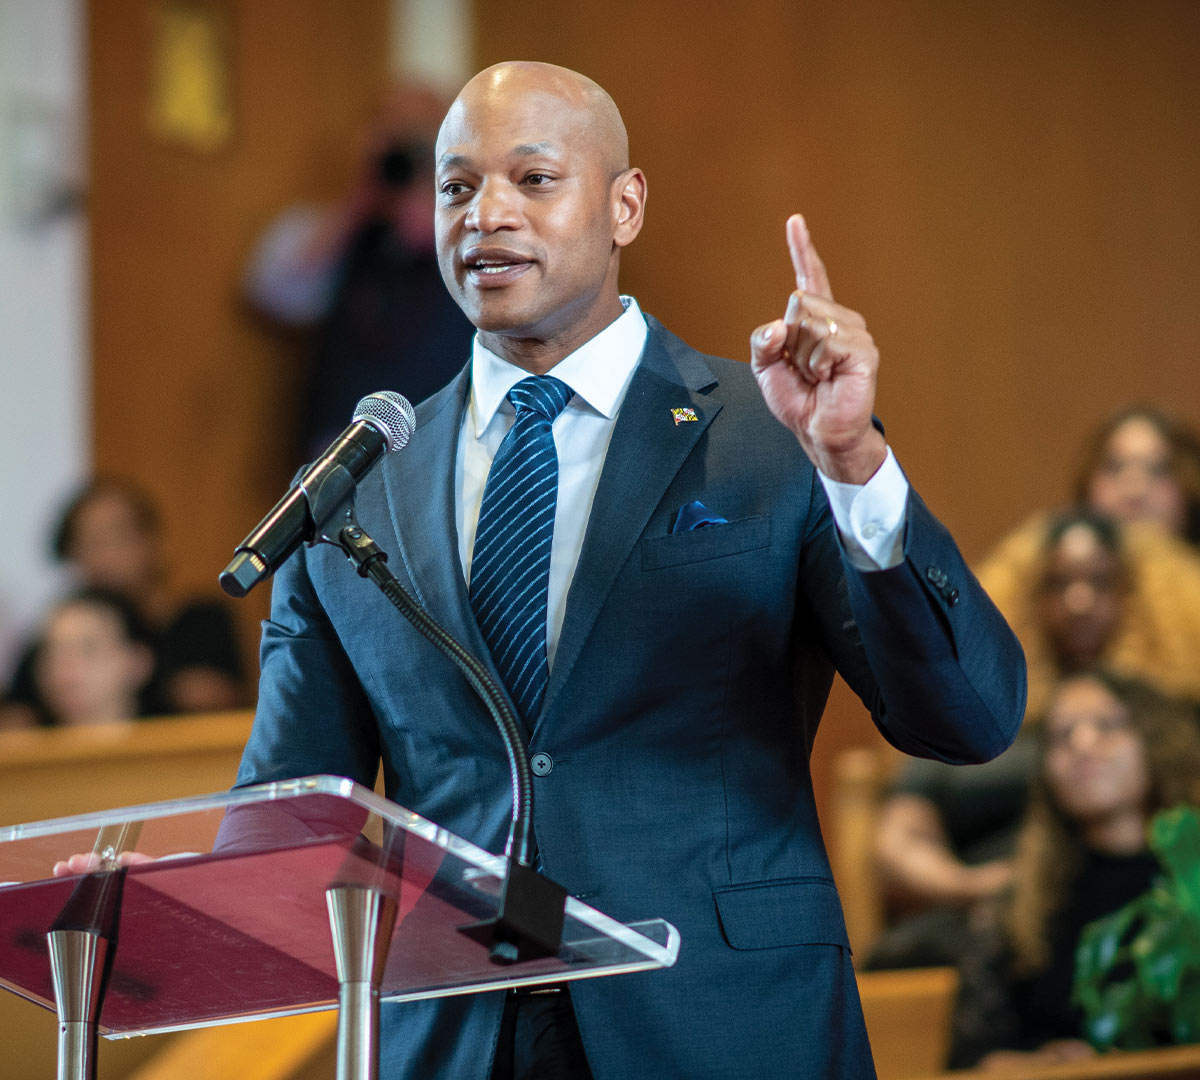 Governor Wes Moore speaking at the pulpit